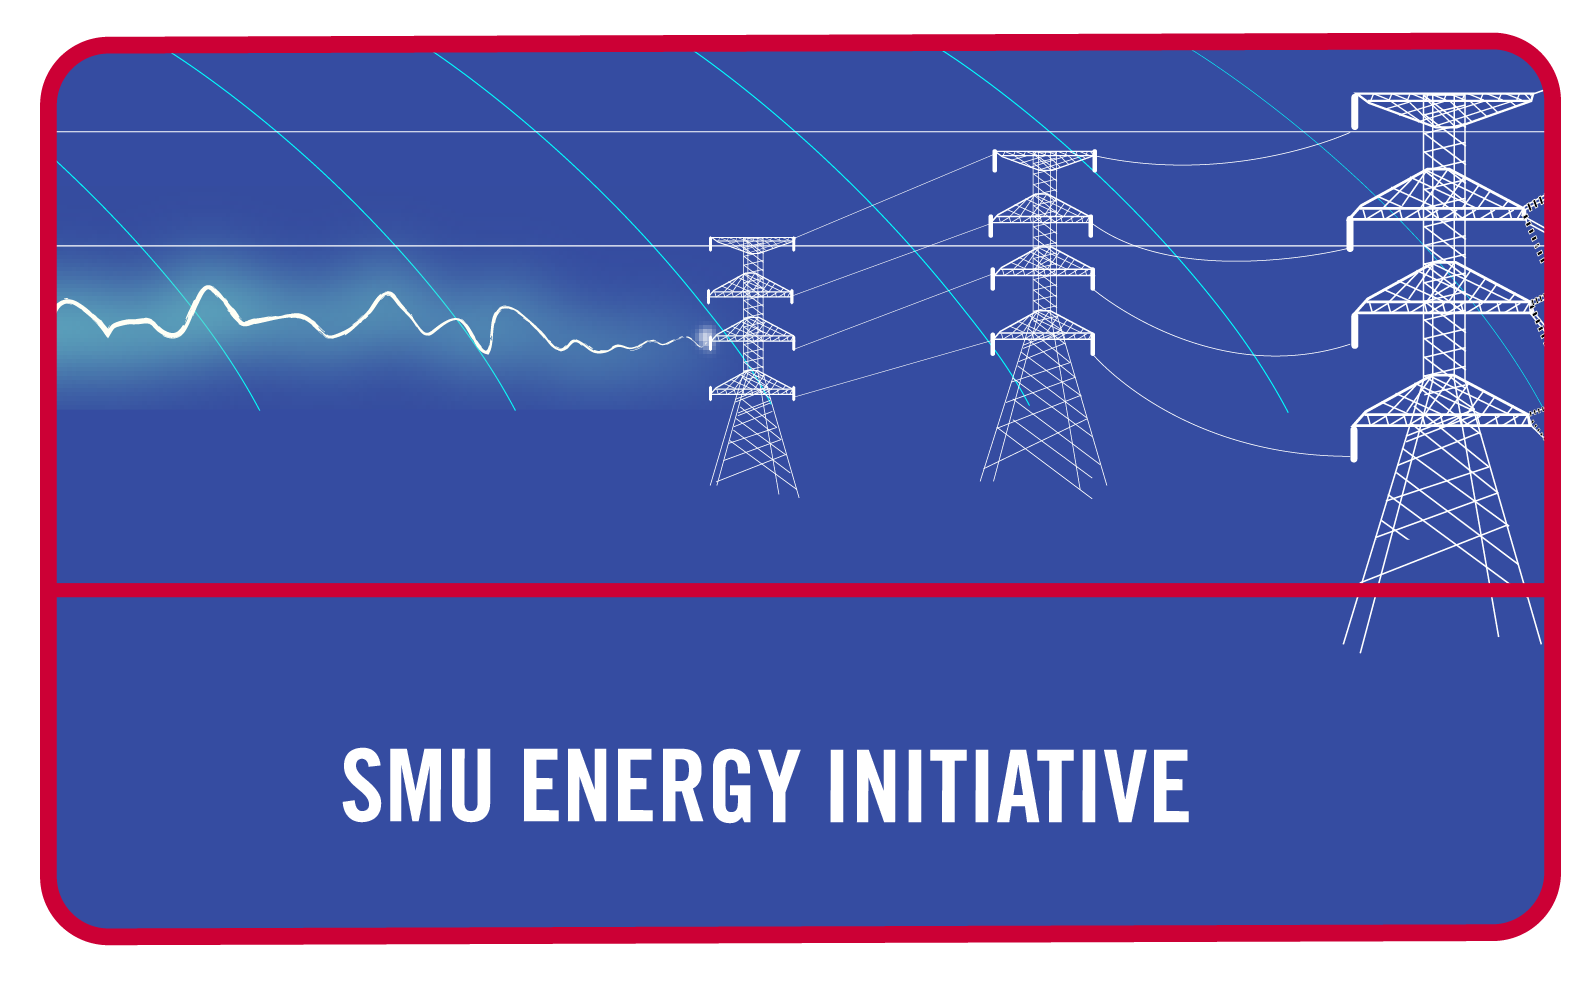 Stylized image of Energy with electrical towers introduction of Curtailment